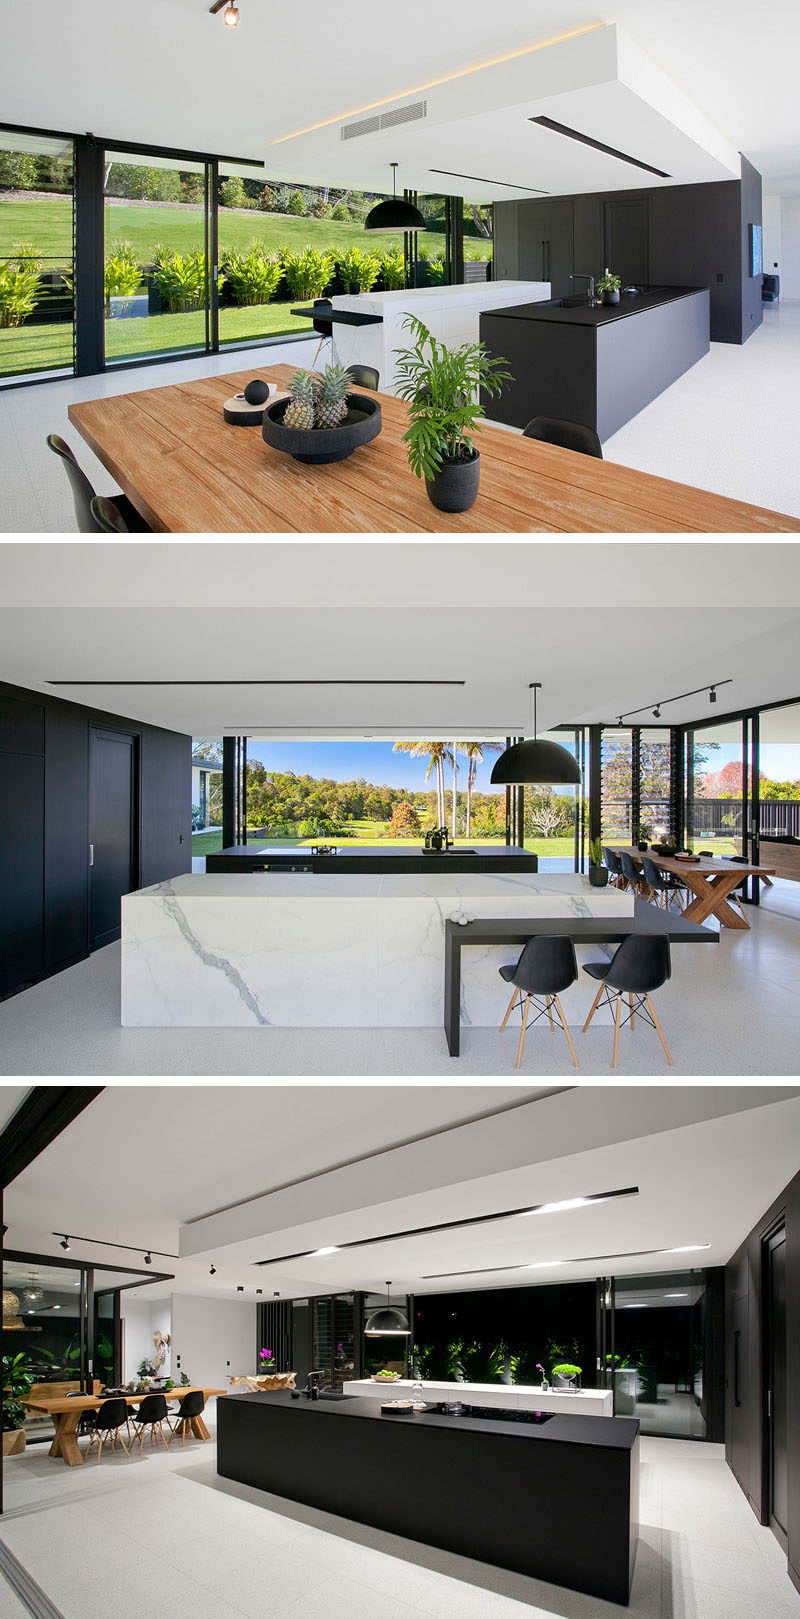 In this minimalist kitchen, fine matt black laminate and marble-look porcelain used in the design of the islands , and a large black box hides the essentials of the kitchen. Inside there's plenty of storage, an additional butlers sink and extra prep space.